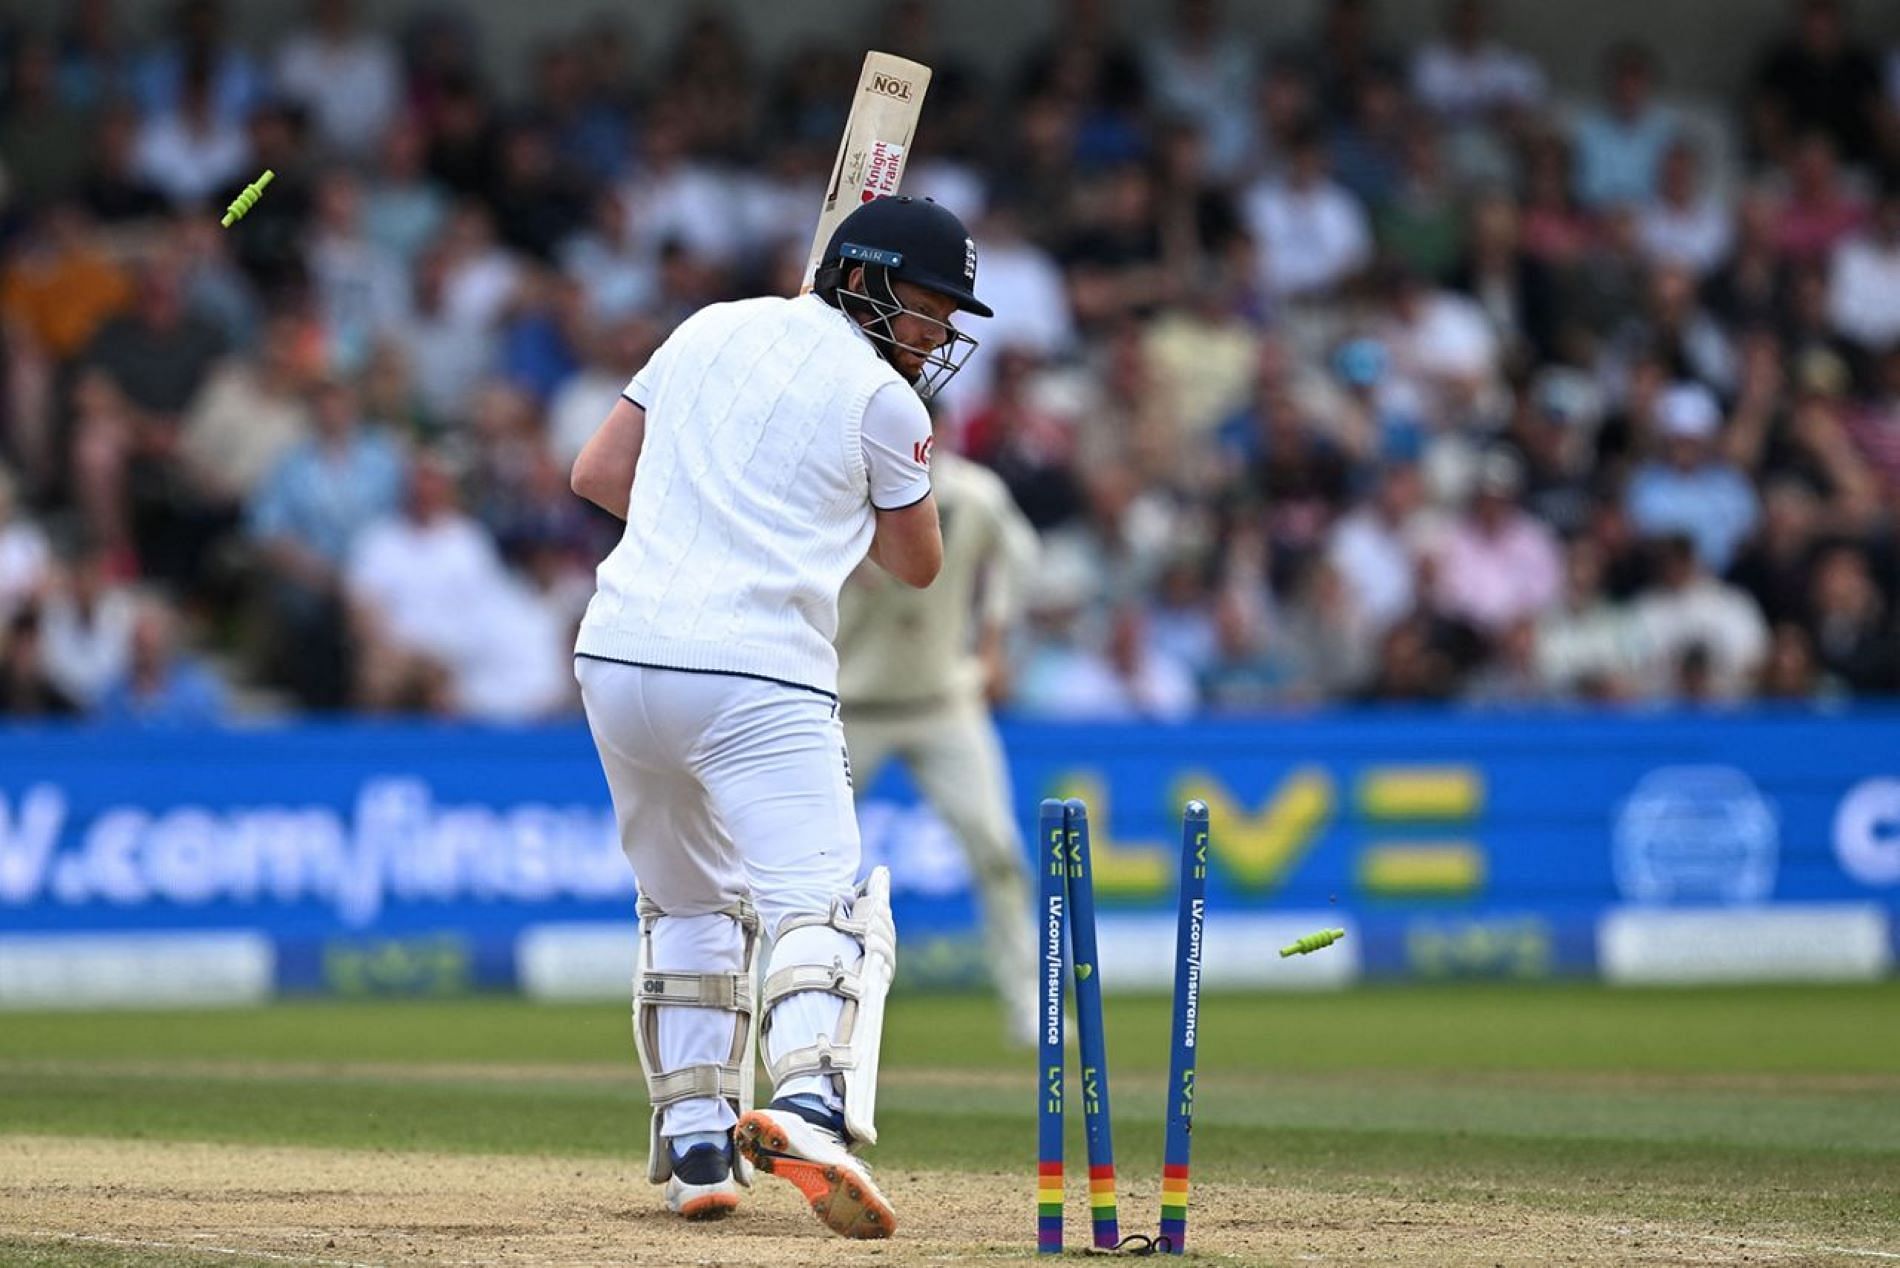 Jonny Bairstow continued his horrendous run in the third Ashes Test